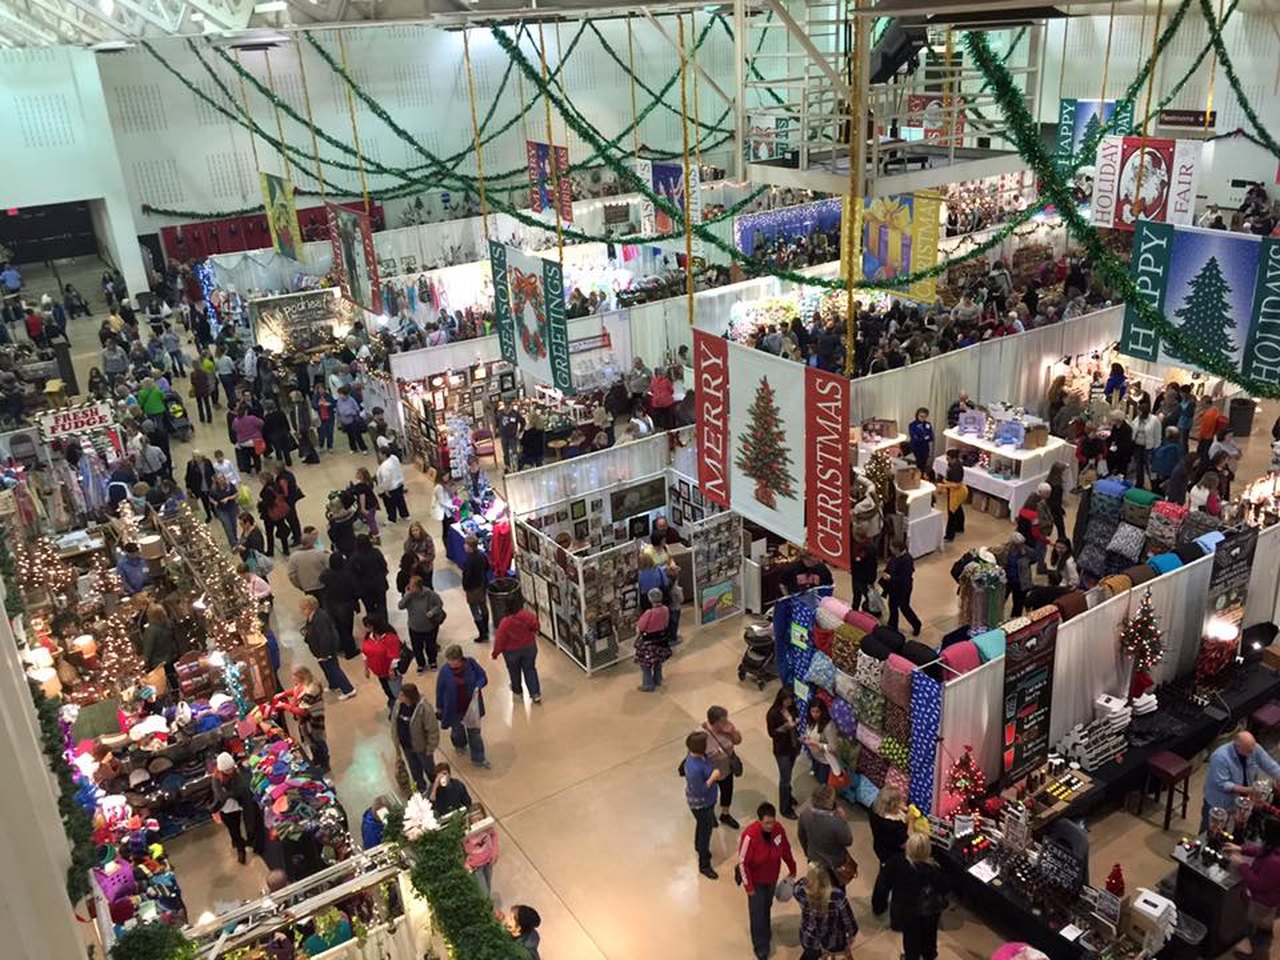 Wisconsin's Holiday Fair Is Full Of Christmas Cheer!